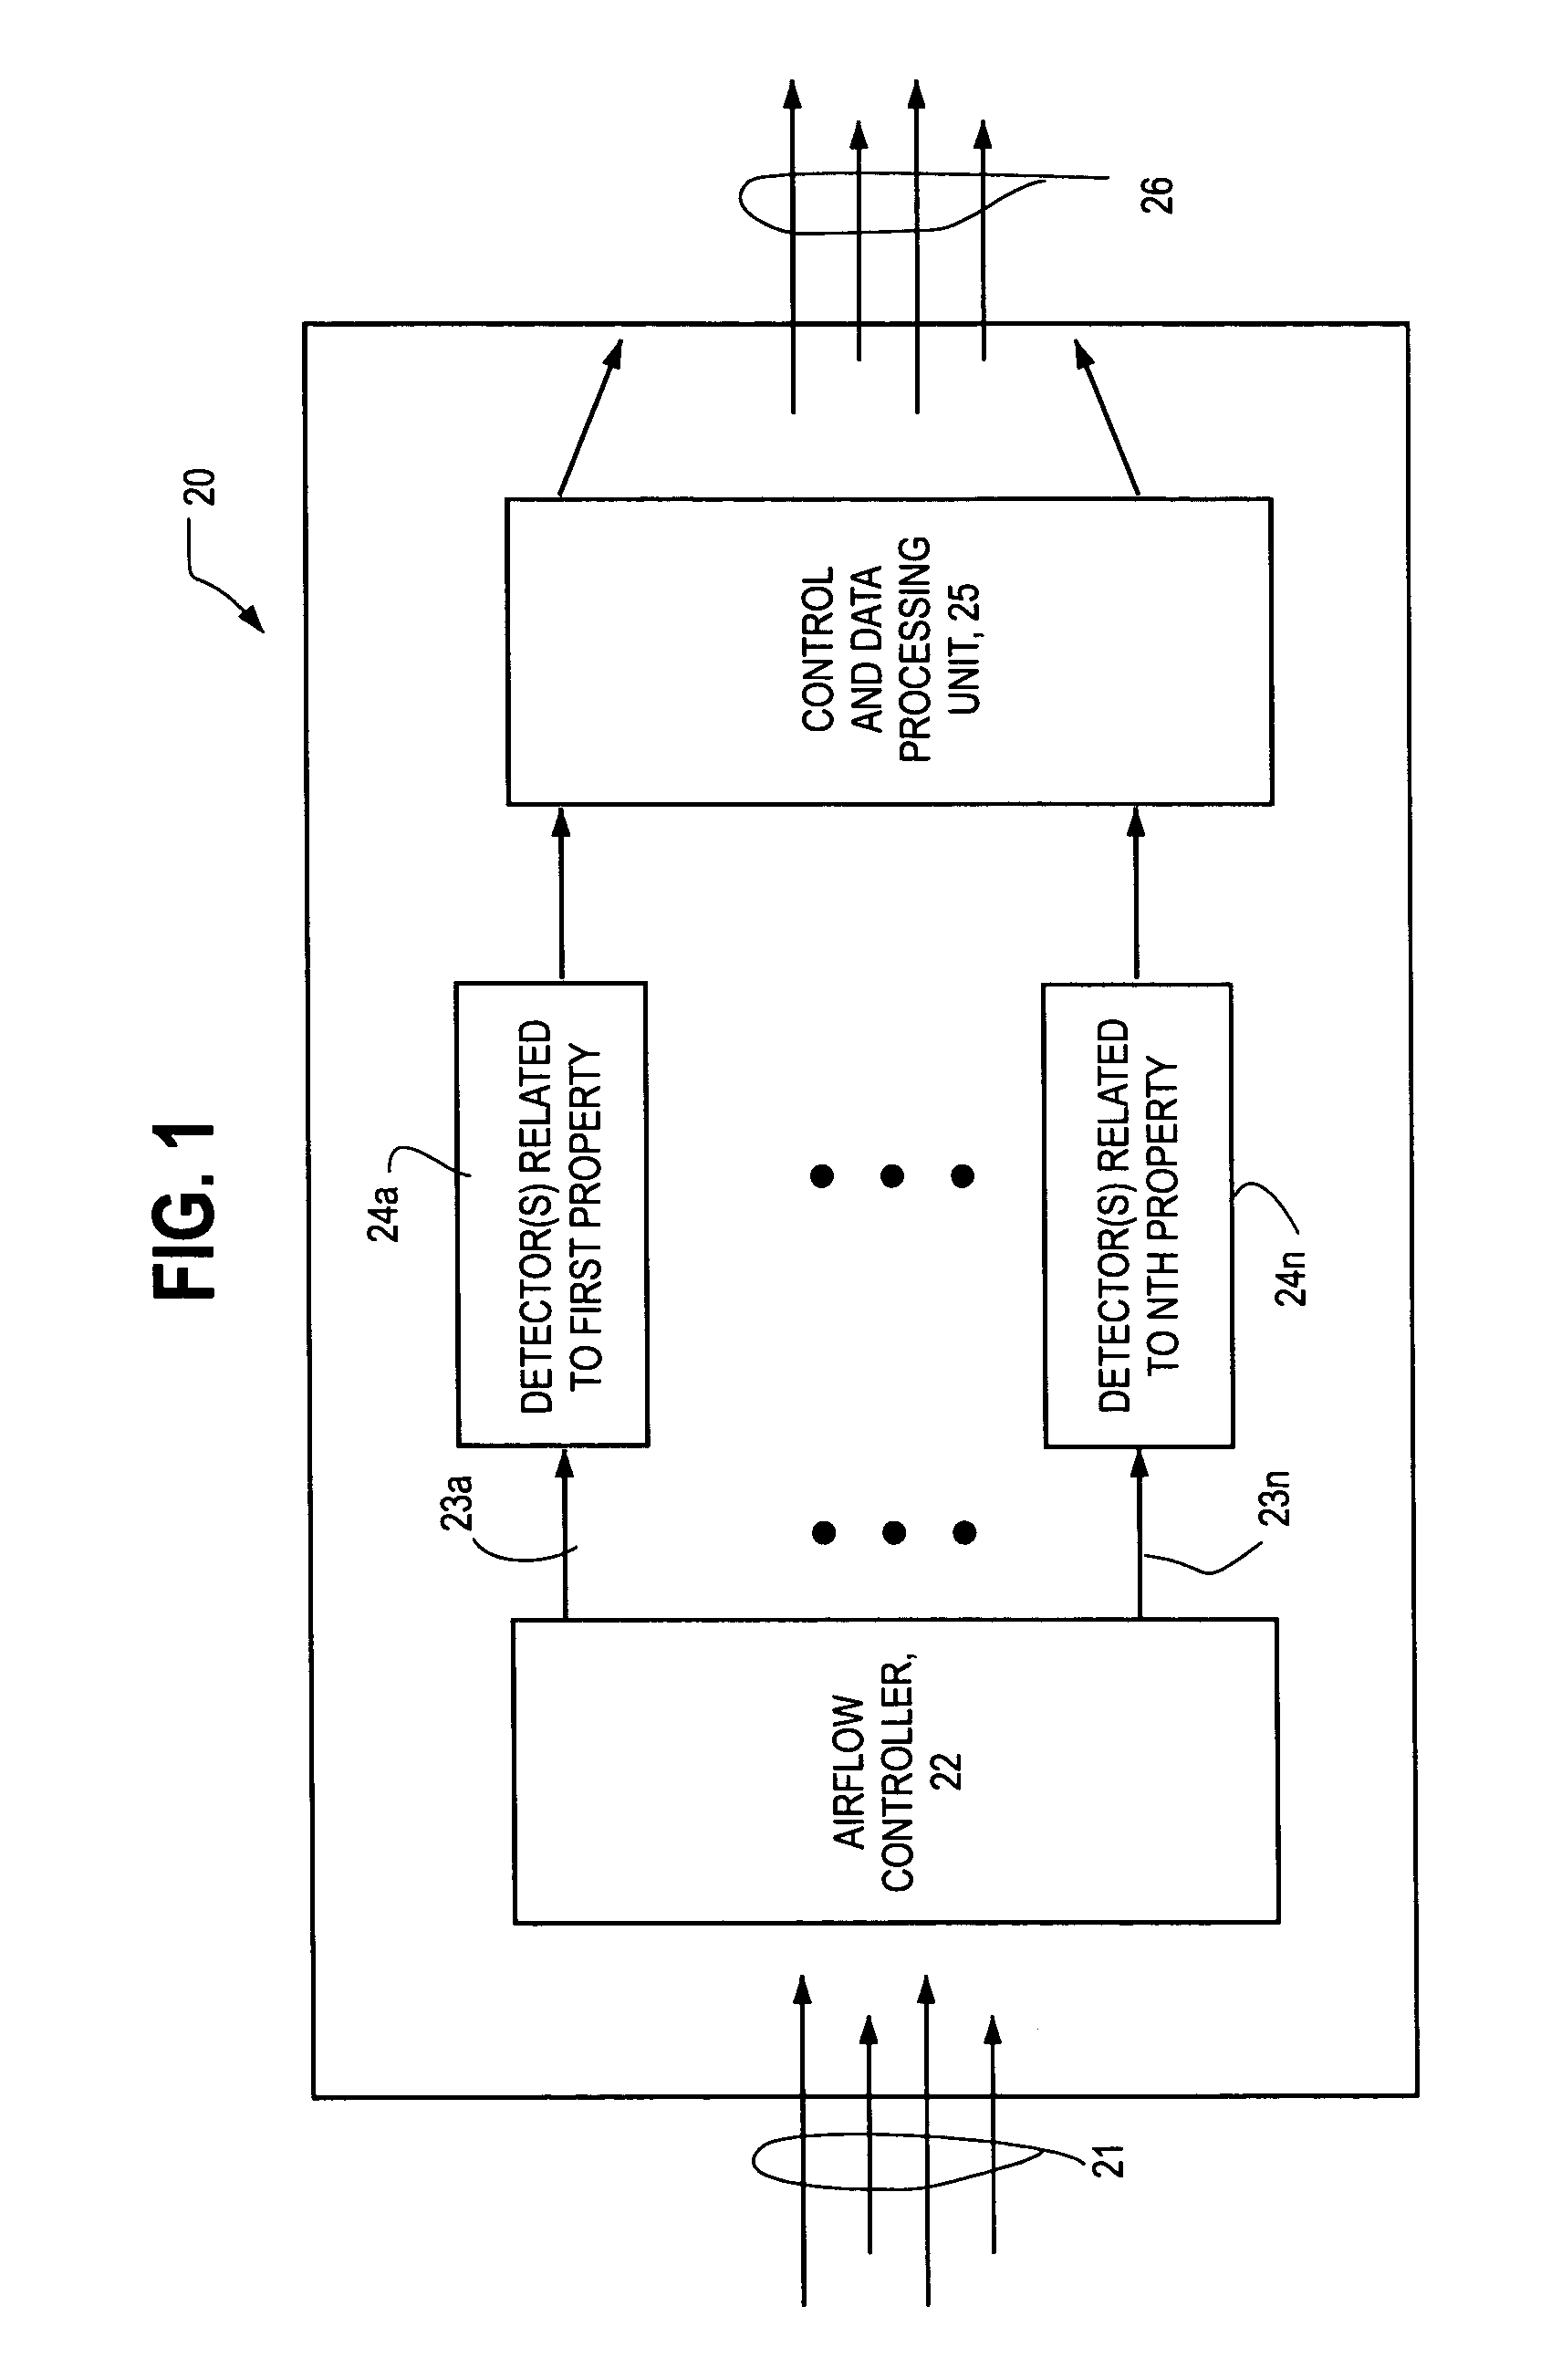 System and method for detection and identification of airborne hazards